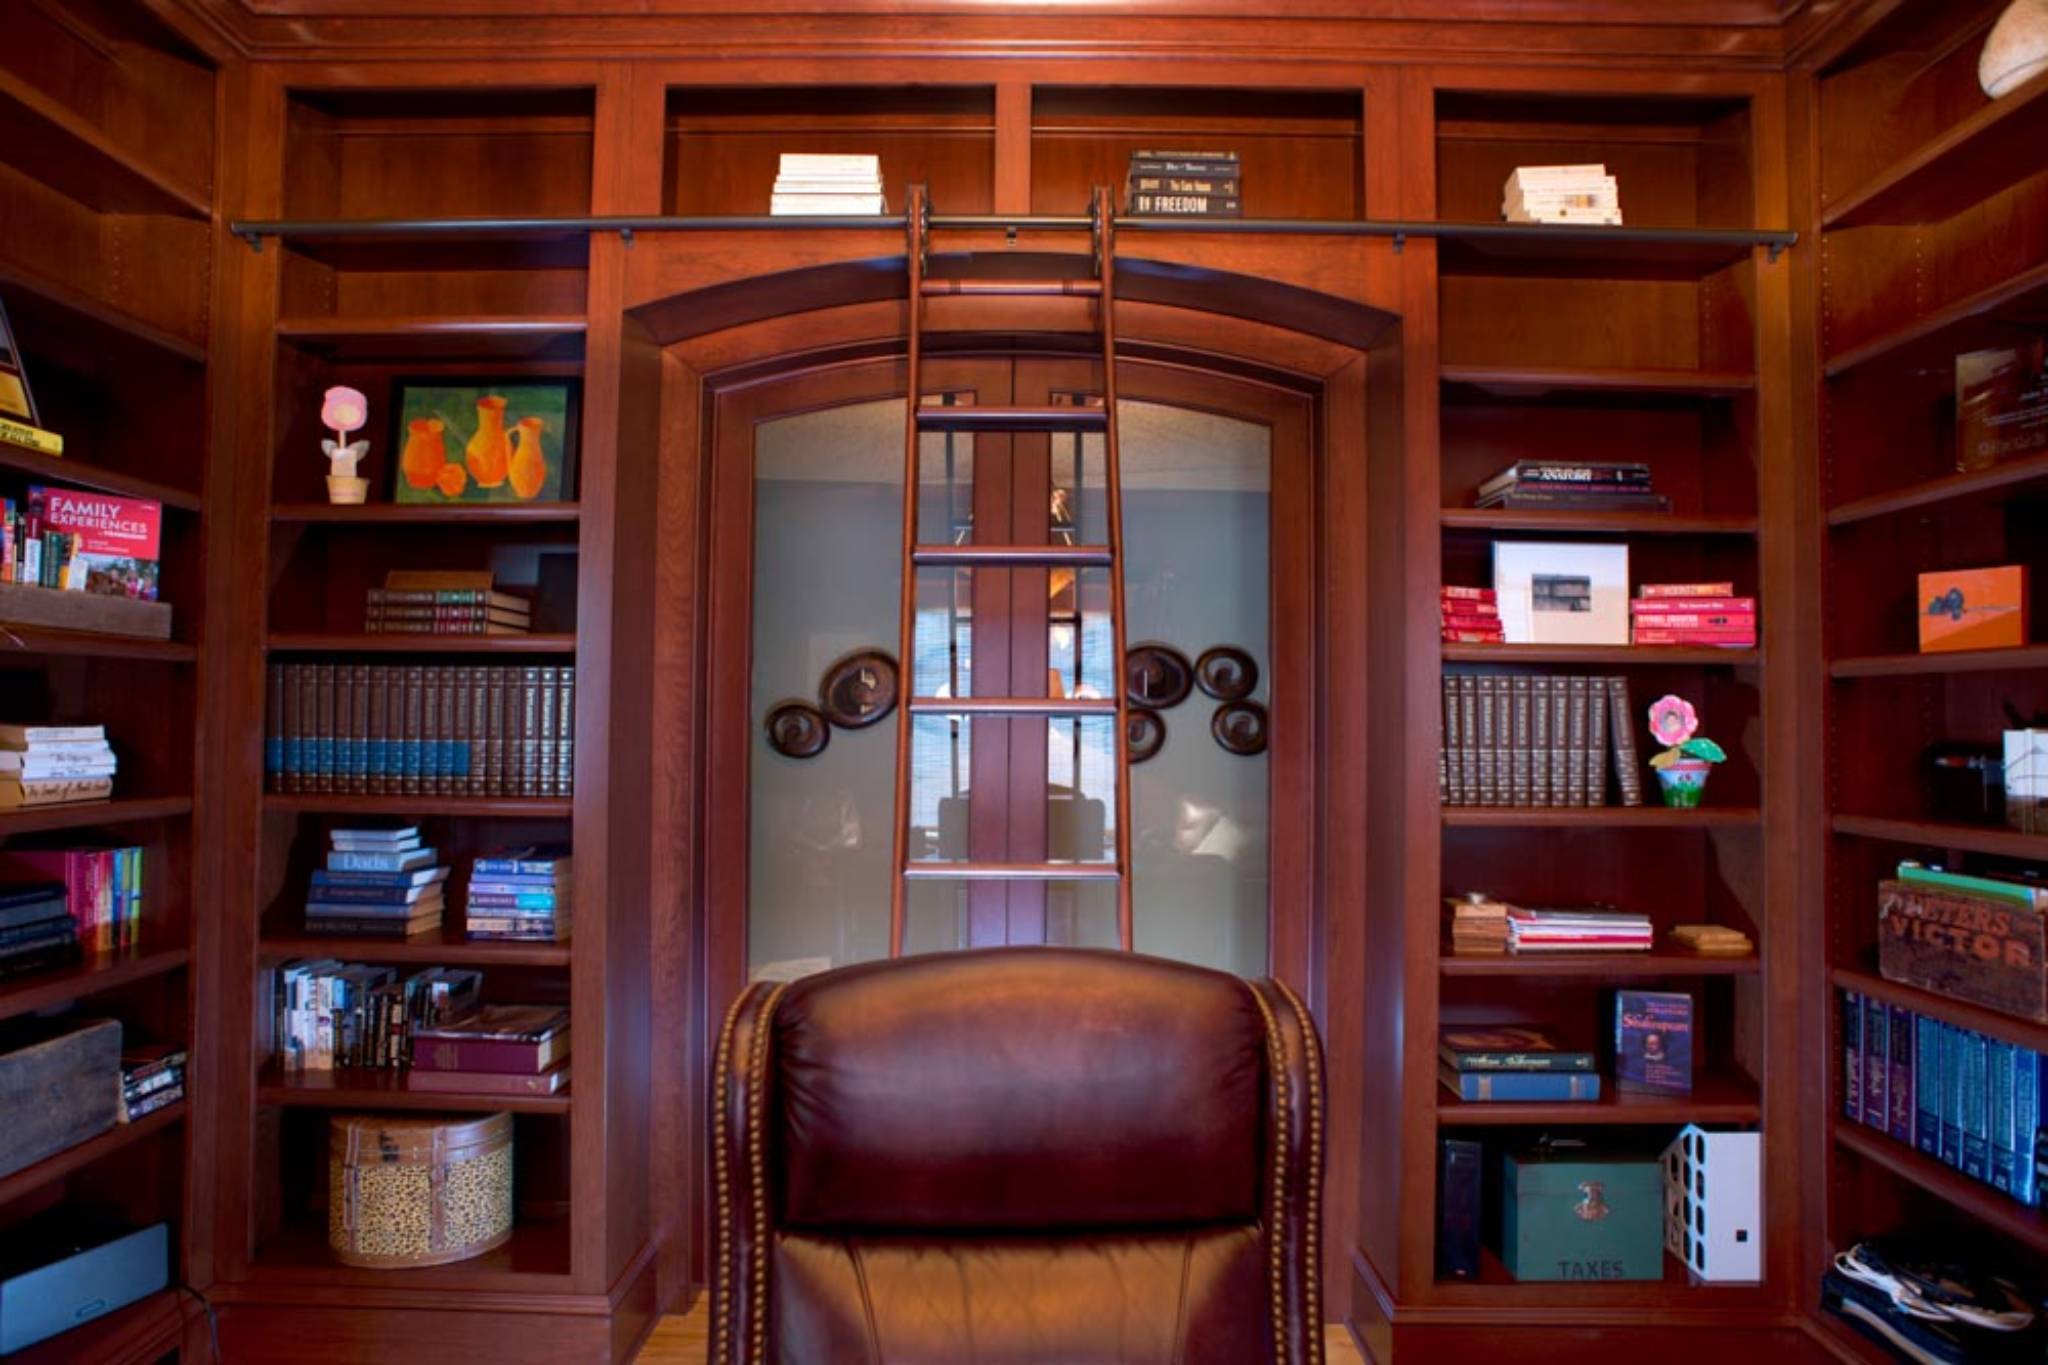 Sophisticated cherry-wrapped home library with built-in bookshelves and custom elliptical glass sliding doors